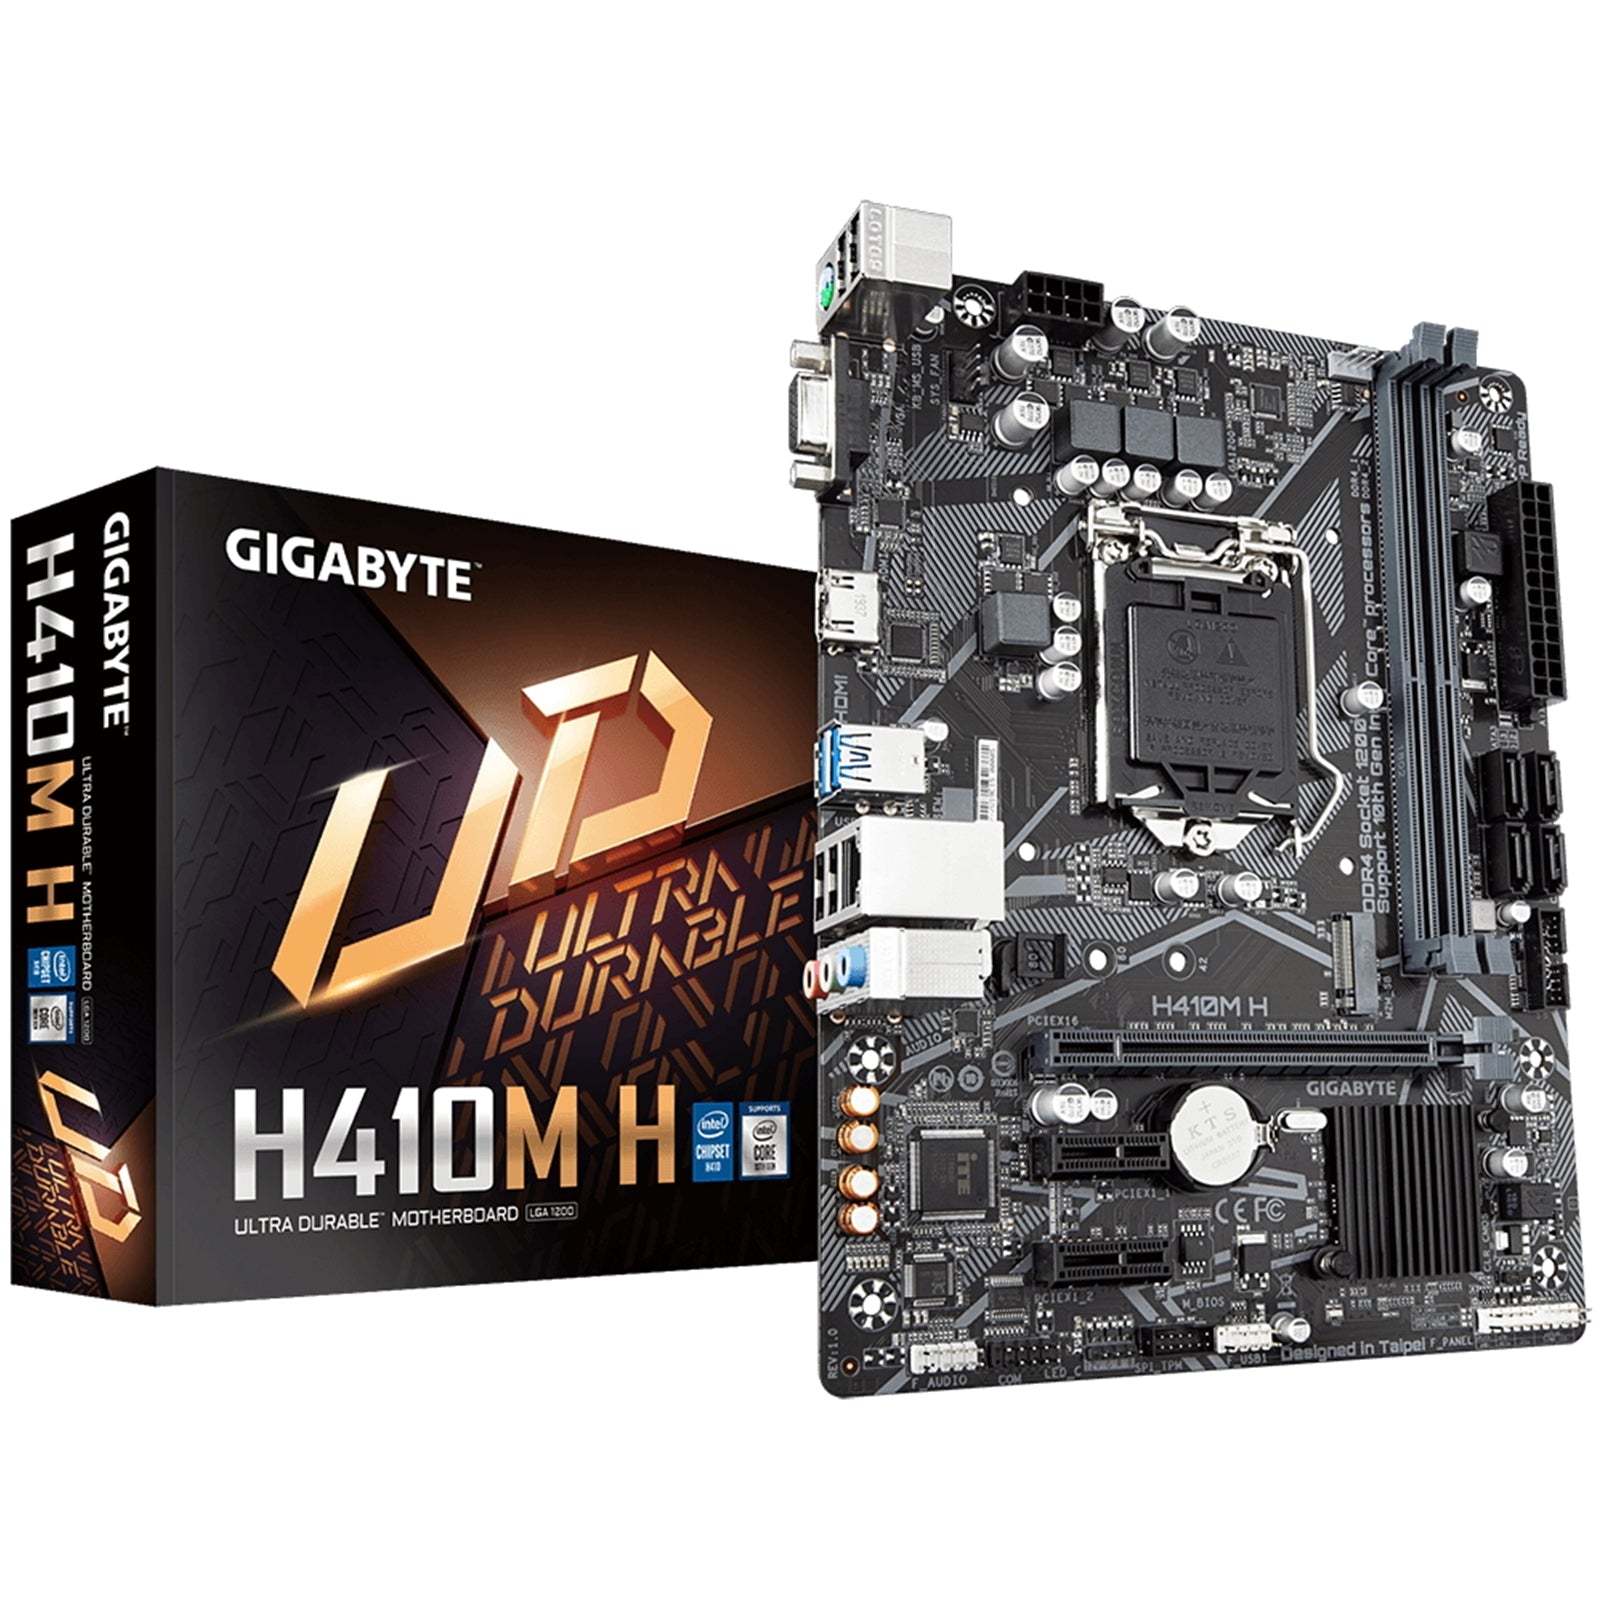 Gigabyte H410M H Gaming Motherboard Intel 10th Gen, DDR4, PCIe x16, M.2 Support, High-End Audio